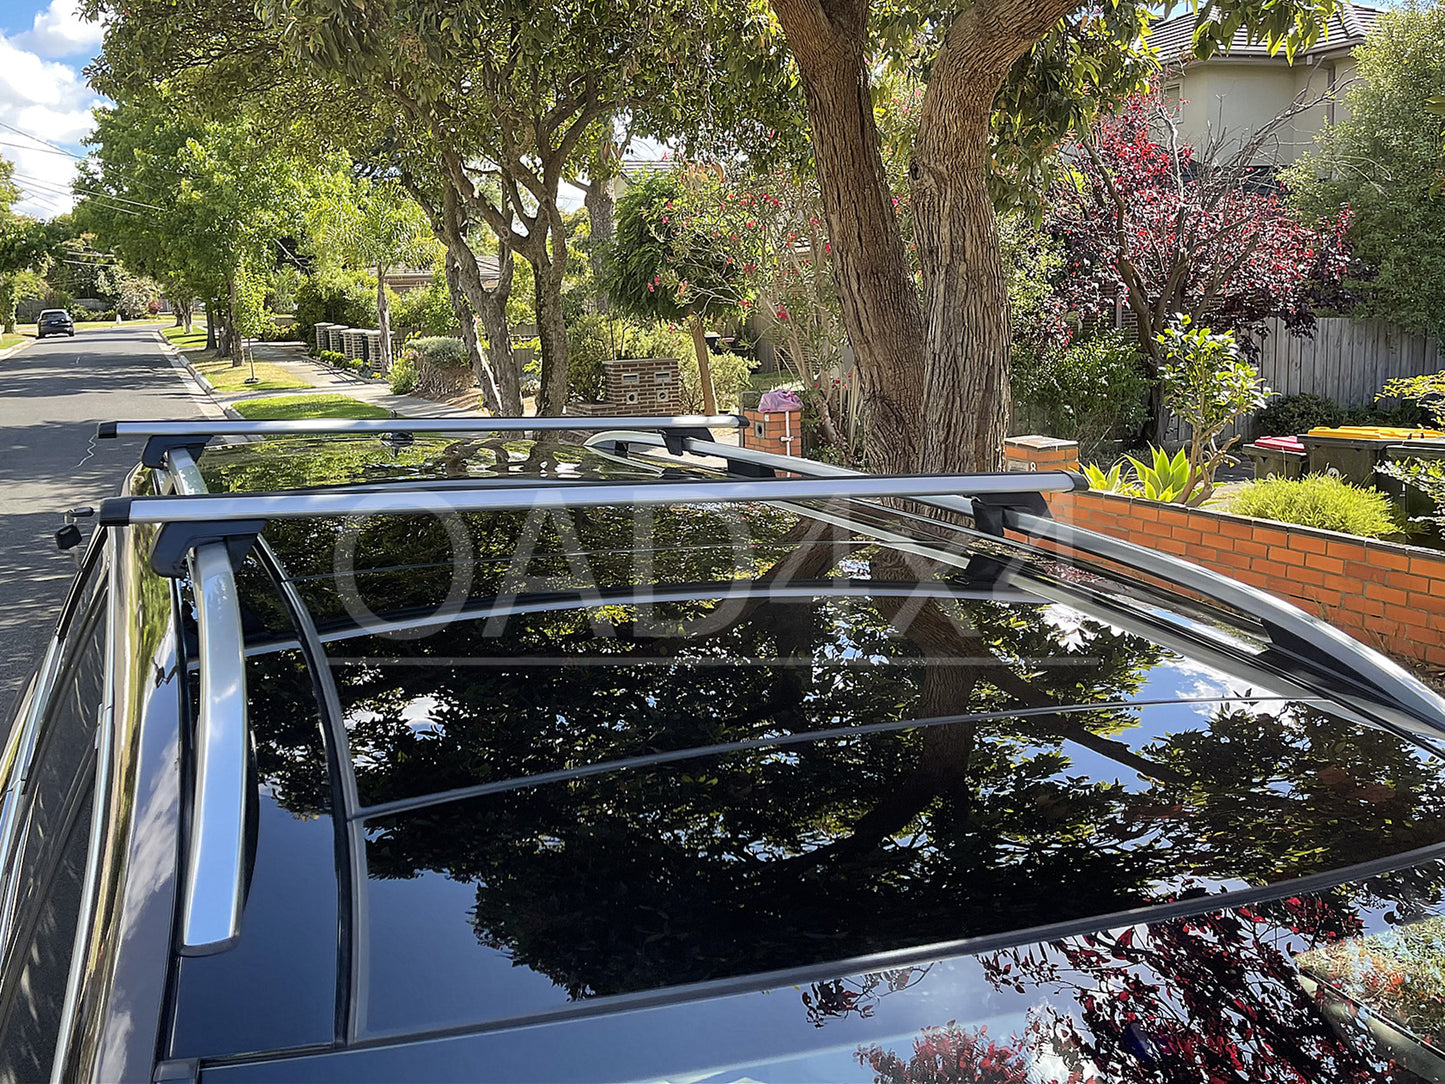 OAD 1 Pair Aluminum Silver Cross Bar Roof Racks Baggage holder for Holden Acadia 18+ with raised roof rail